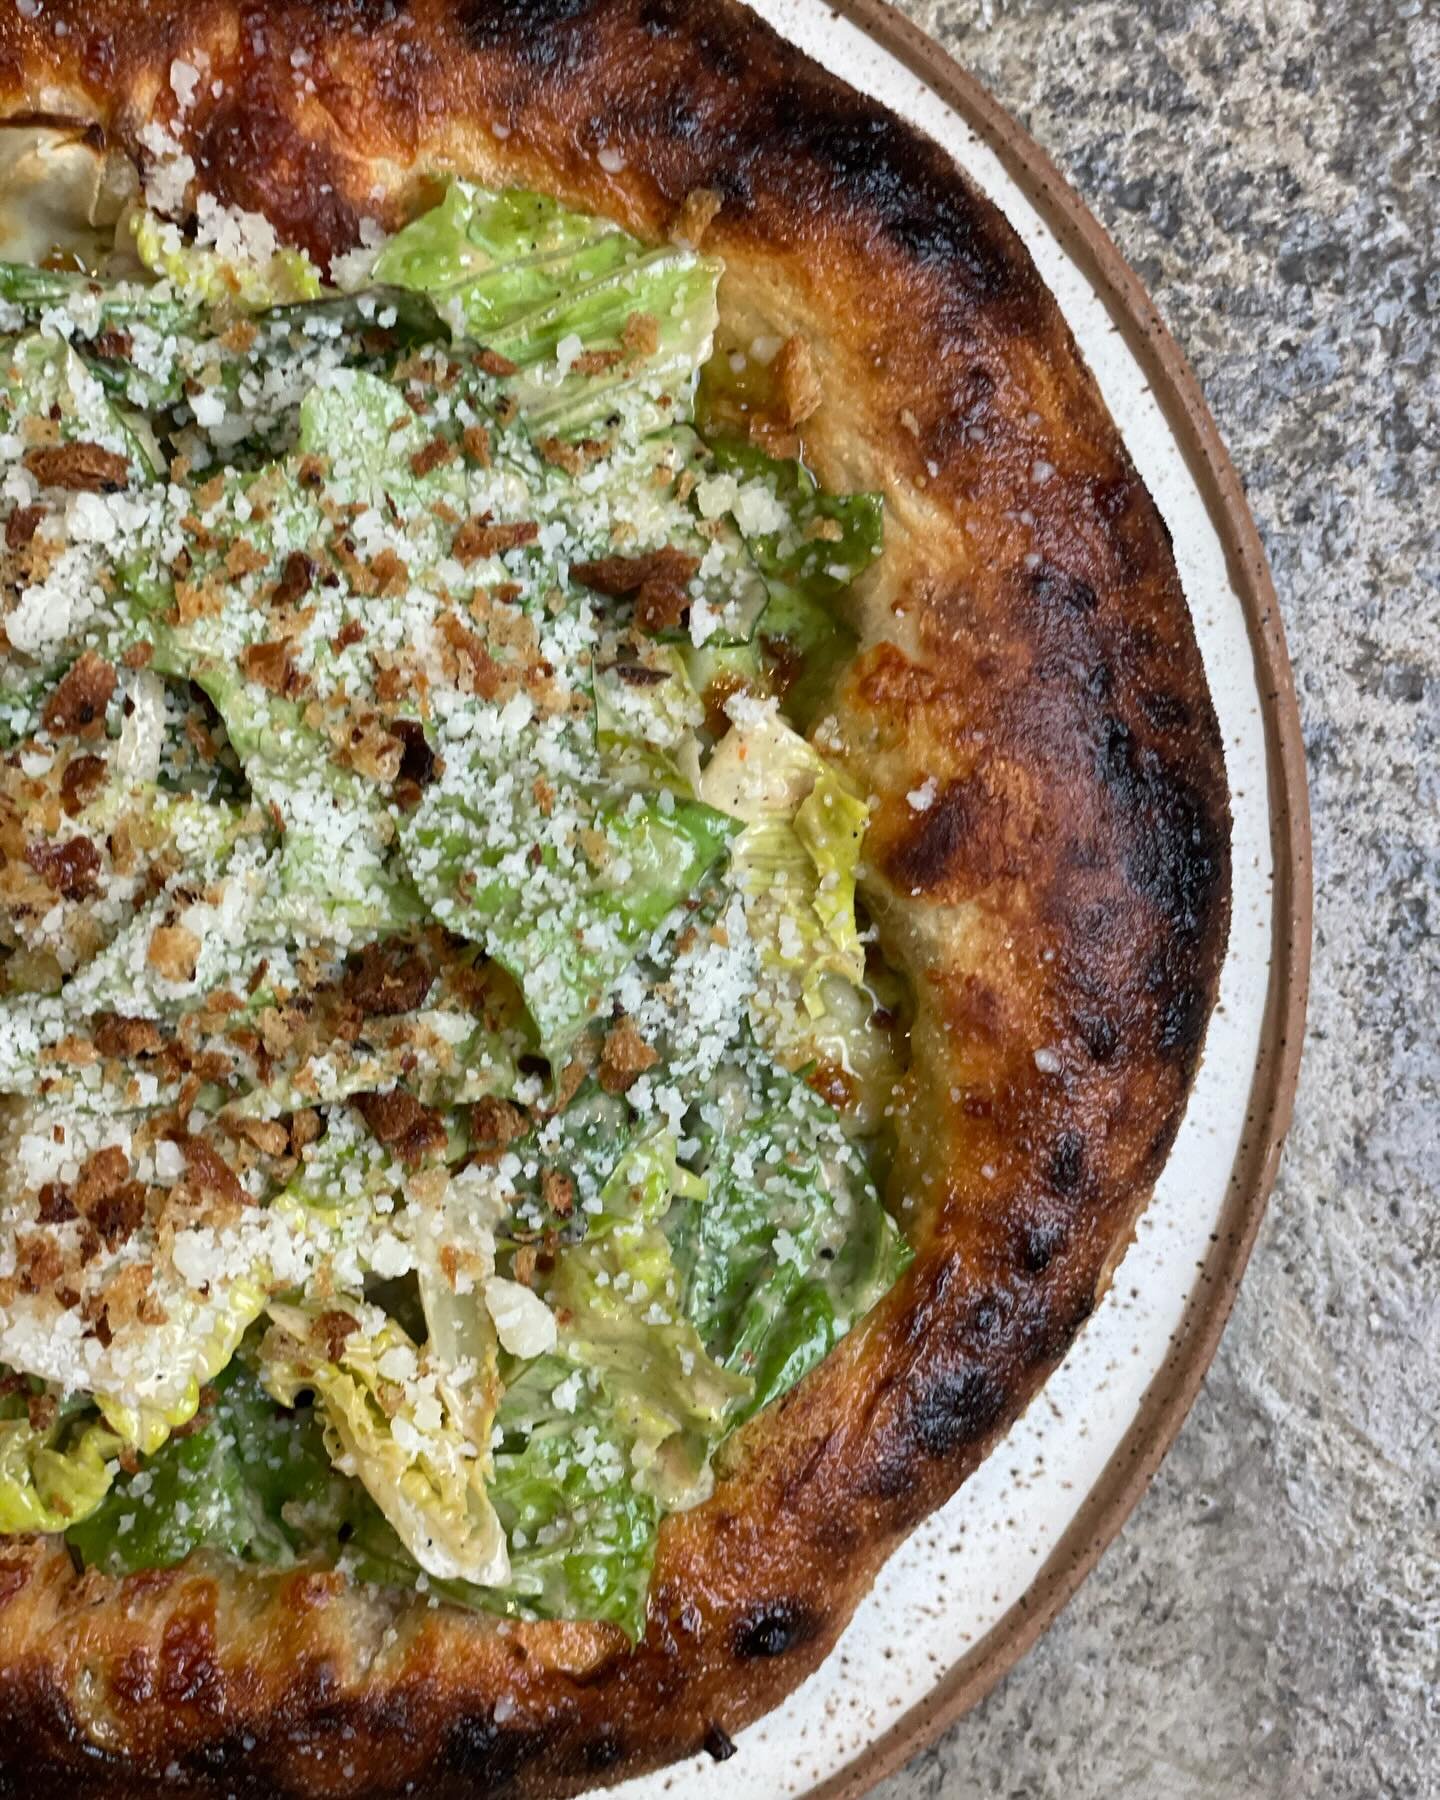 The return of one of our favorites.  The Caesar salad pizza is back for a couple of weeks.  Brave the rain and come pick one up or head the website and order delivery.

Caesar Salad - herb cream, fior di latte, onion, anchovy, sourdough bread crumbs